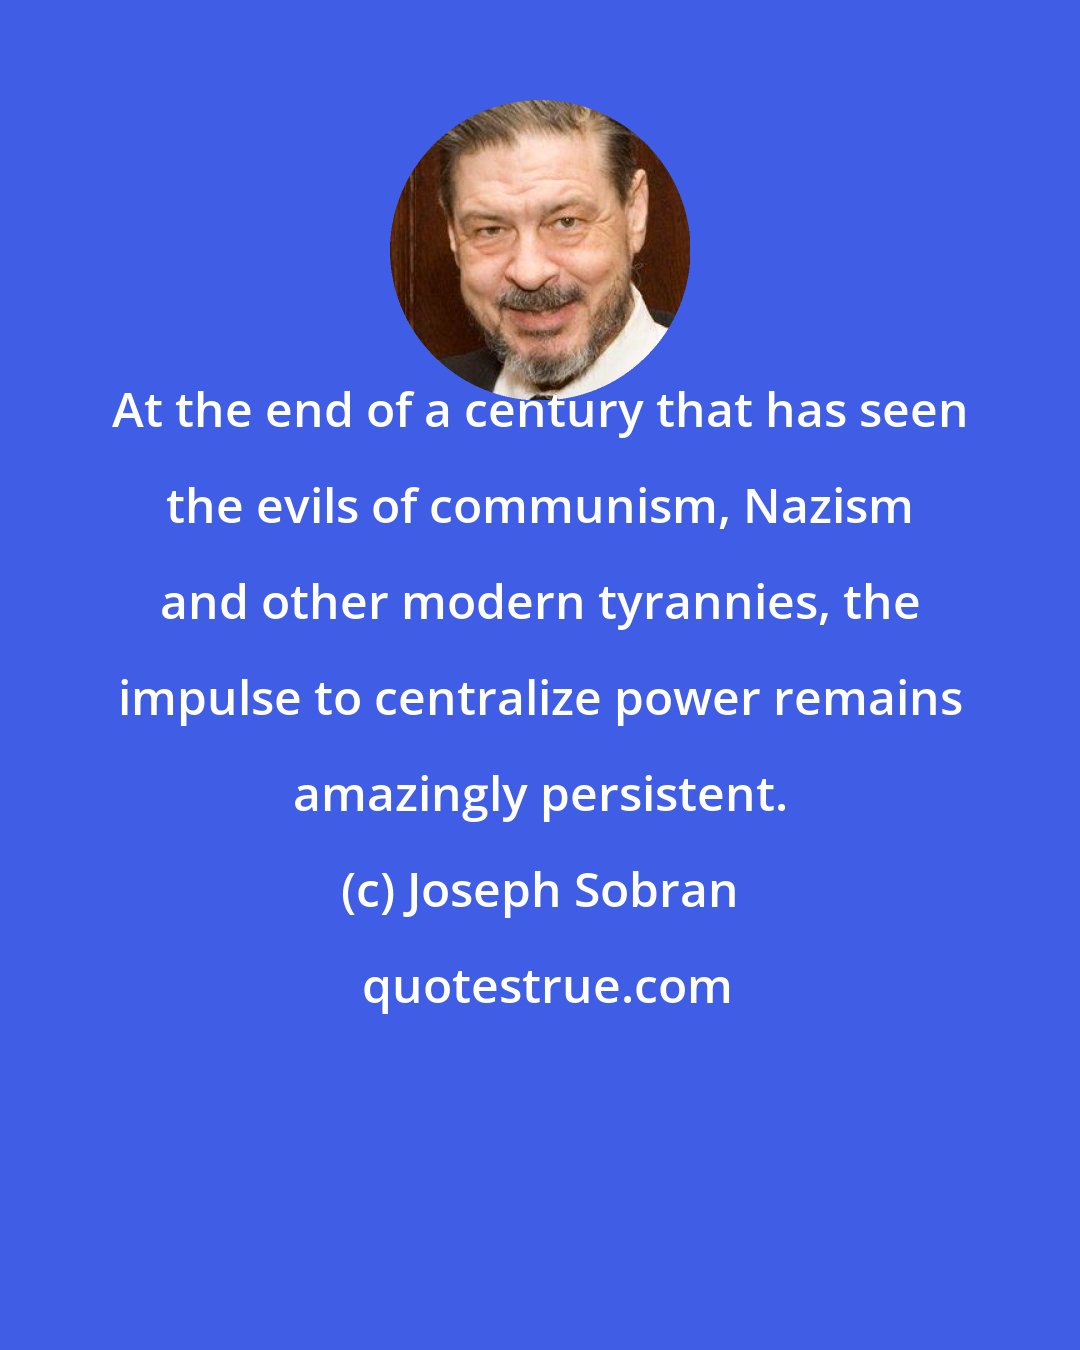 Joseph Sobran: At the end of a century that has seen the evils of communism, Nazism and other modern tyrannies, the impulse to centralize power remains amazingly persistent.